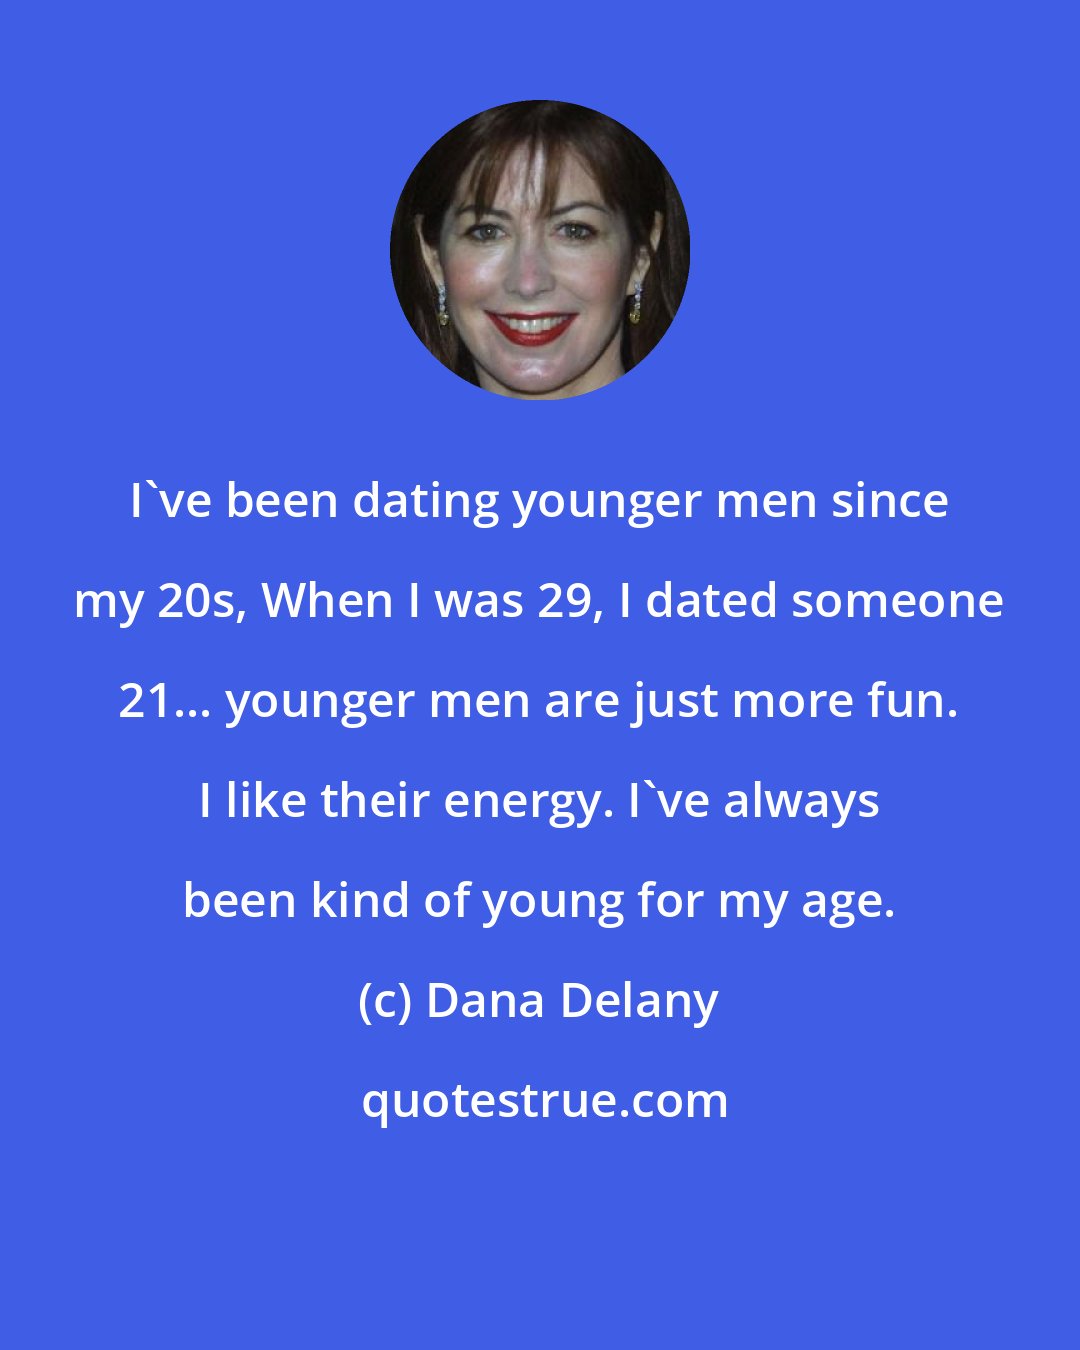 Dana Delany: I've been dating younger men since my 20s, When I was 29, I dated someone 21... younger men are just more fun. I like their energy. I've always been kind of young for my age.